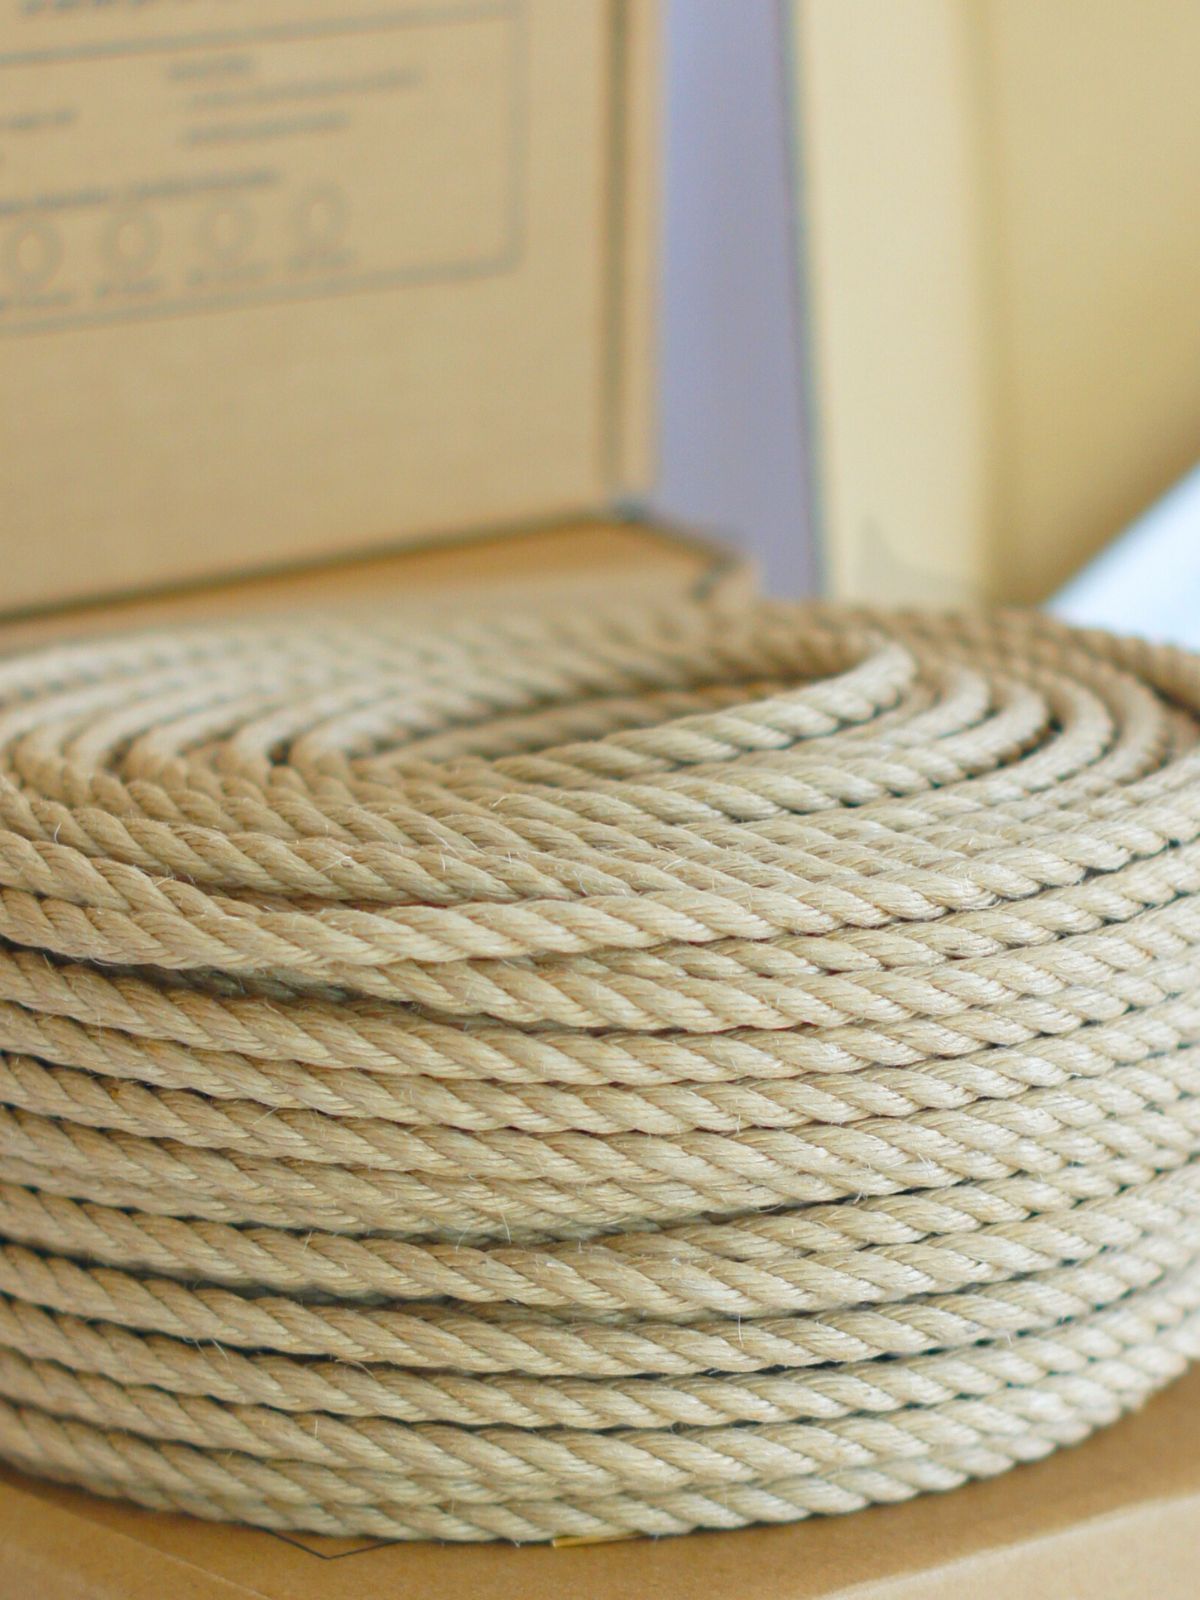 SINGLE RAW ROLL - 50m raw jute rope for bondage, Shibari and Kinbaku, cut and knot your own ropes